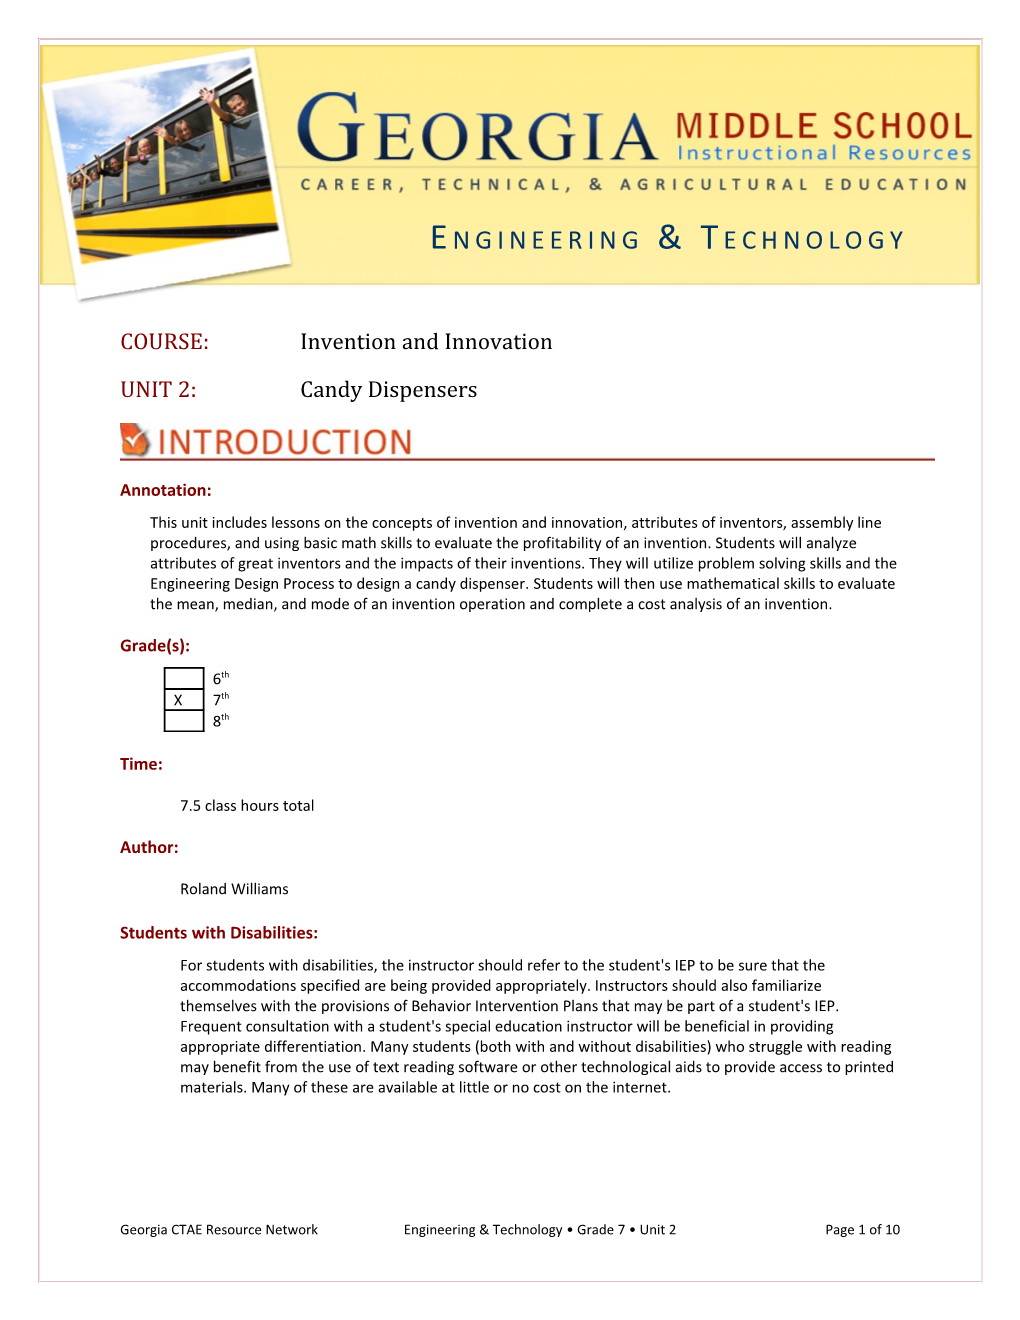 COURSE: Invention and Innovation